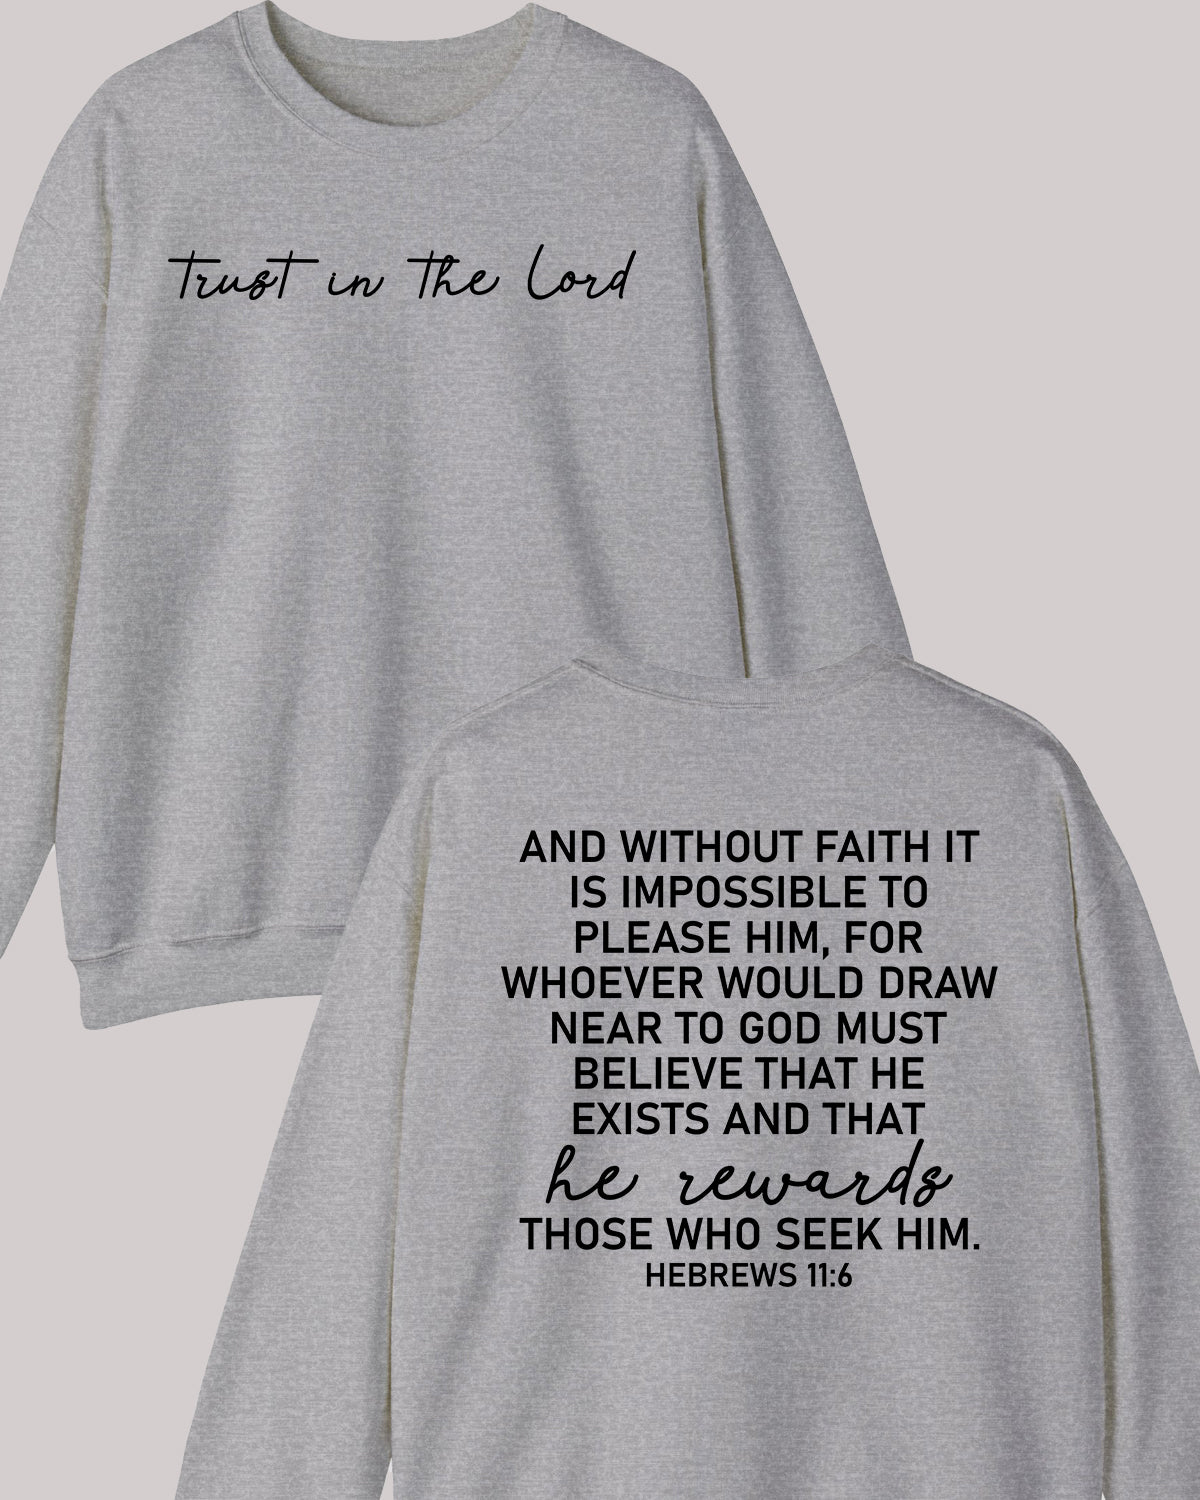 Trust In The Lord Humorous Christian Sweatshirts Front back Print